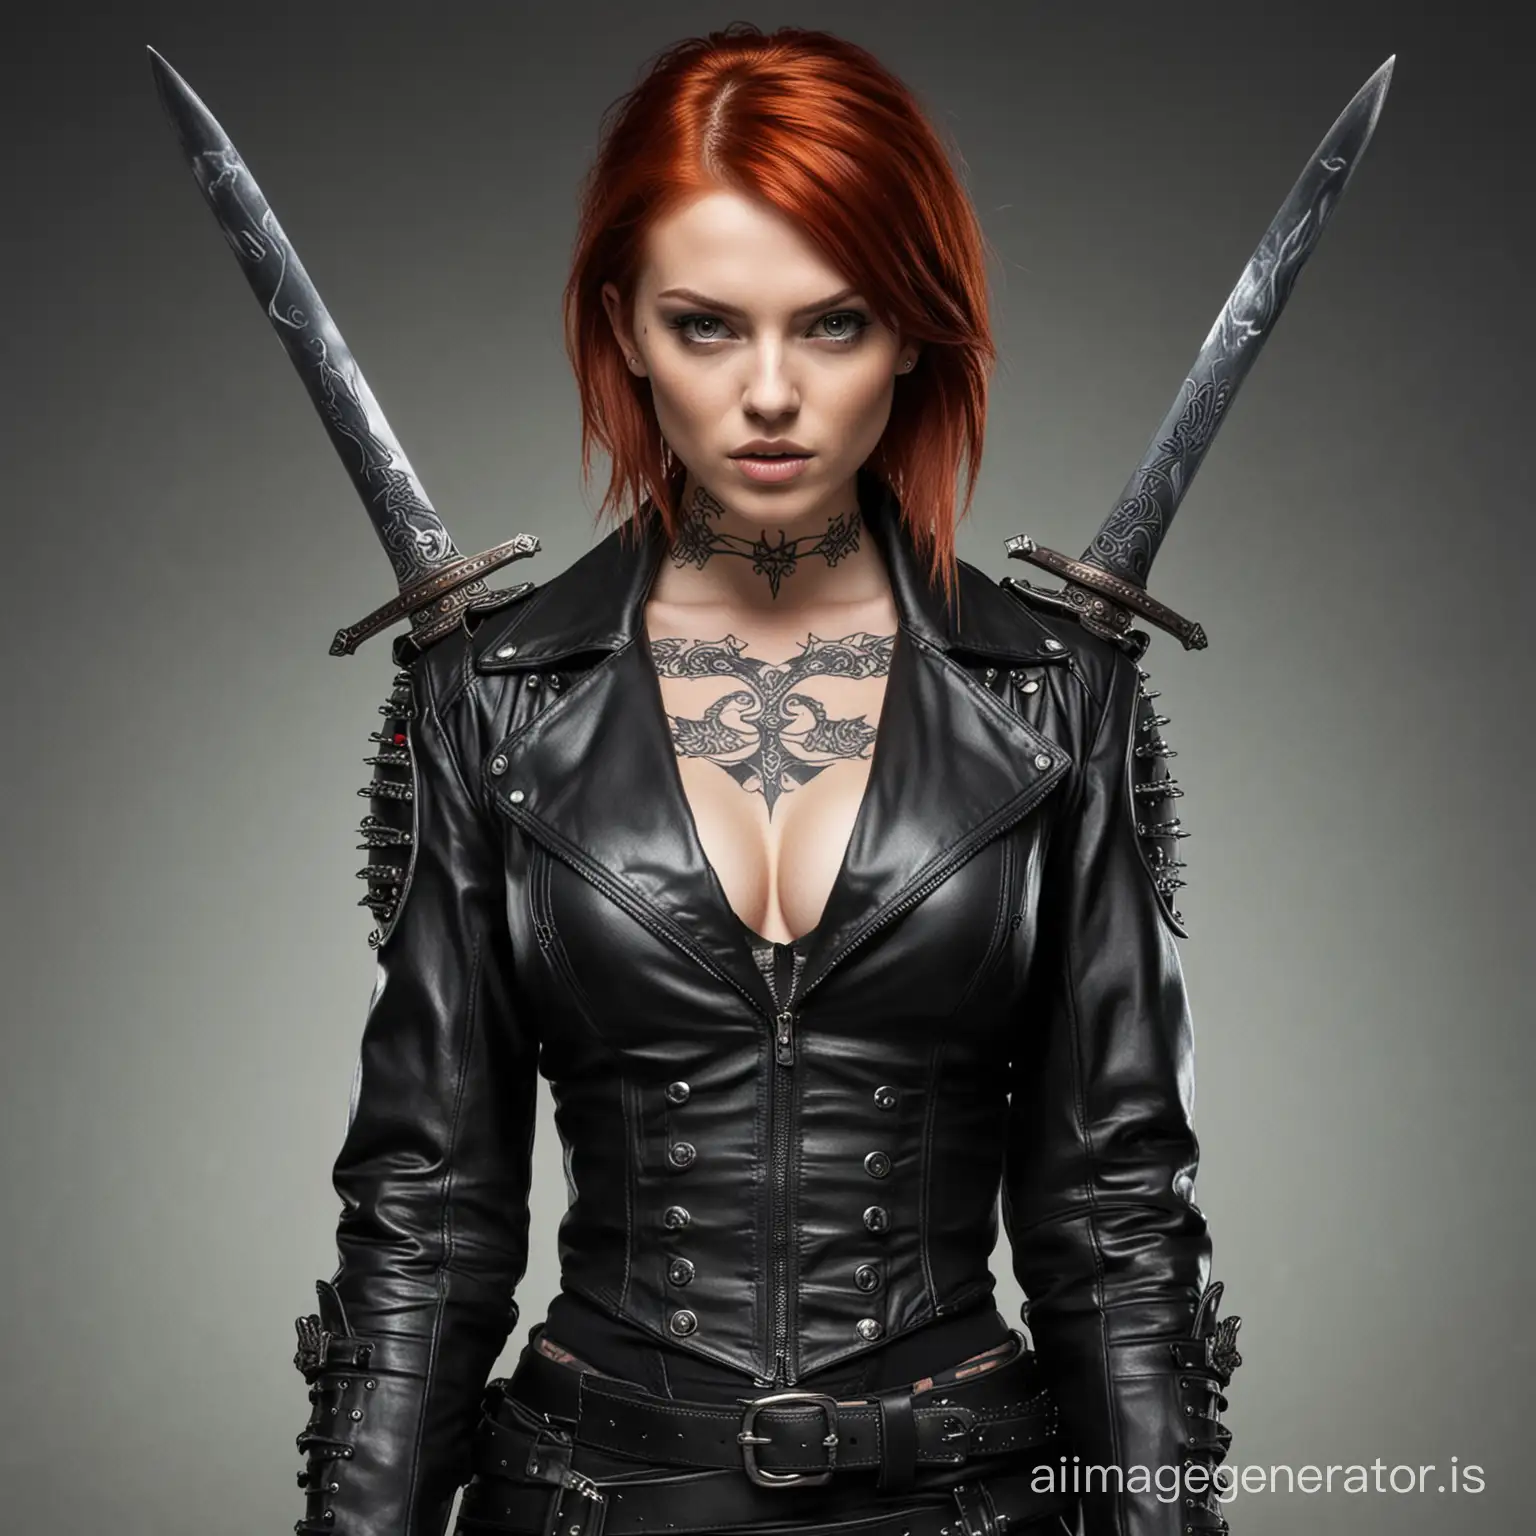 The girl. With red hair and white eyes. Dressed in a black leather suit with two swords on her back. Tattoo on her neck and arm.